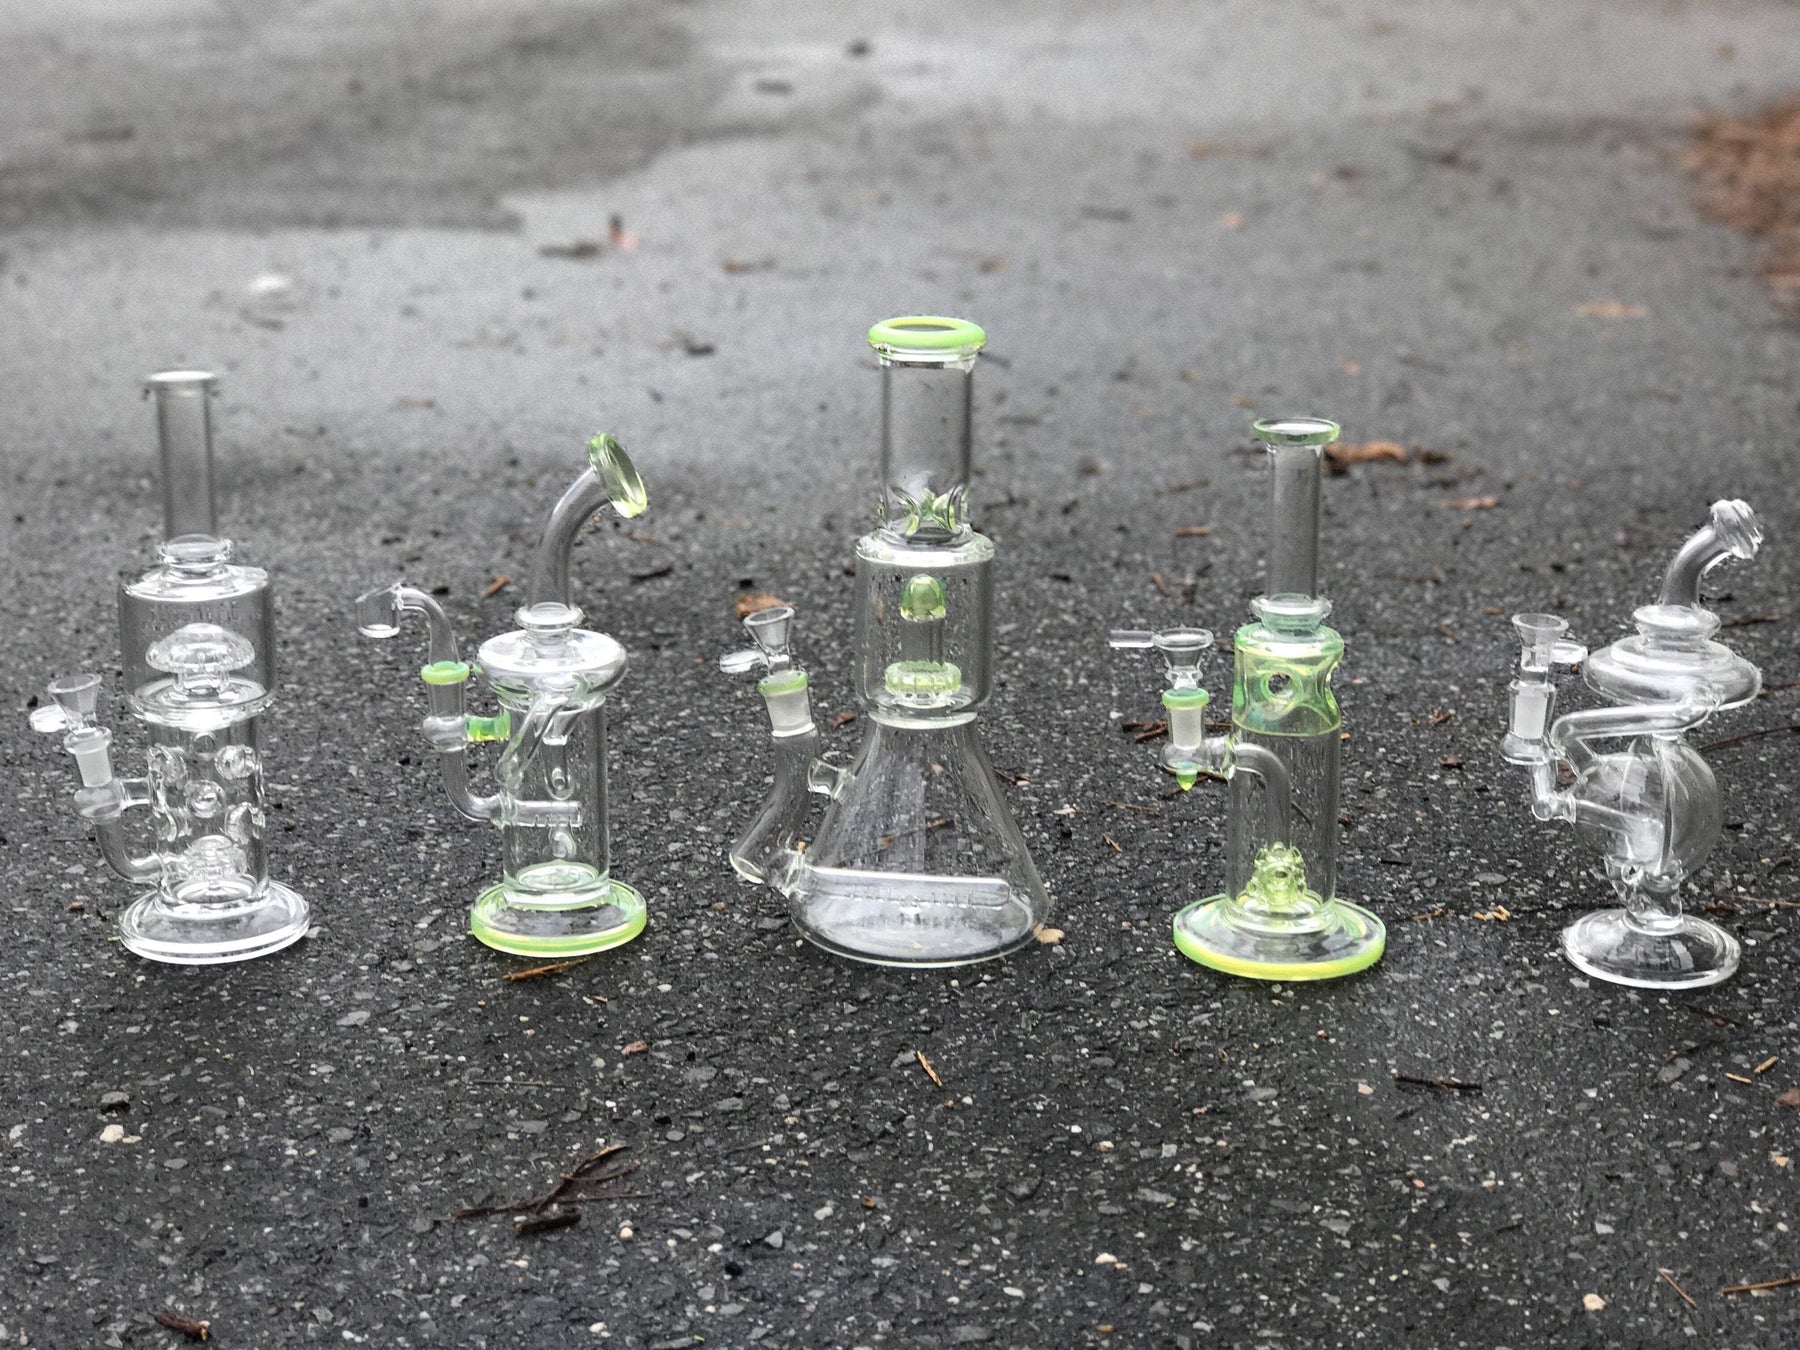 6 Reasons You Should Buy Scientific Glass